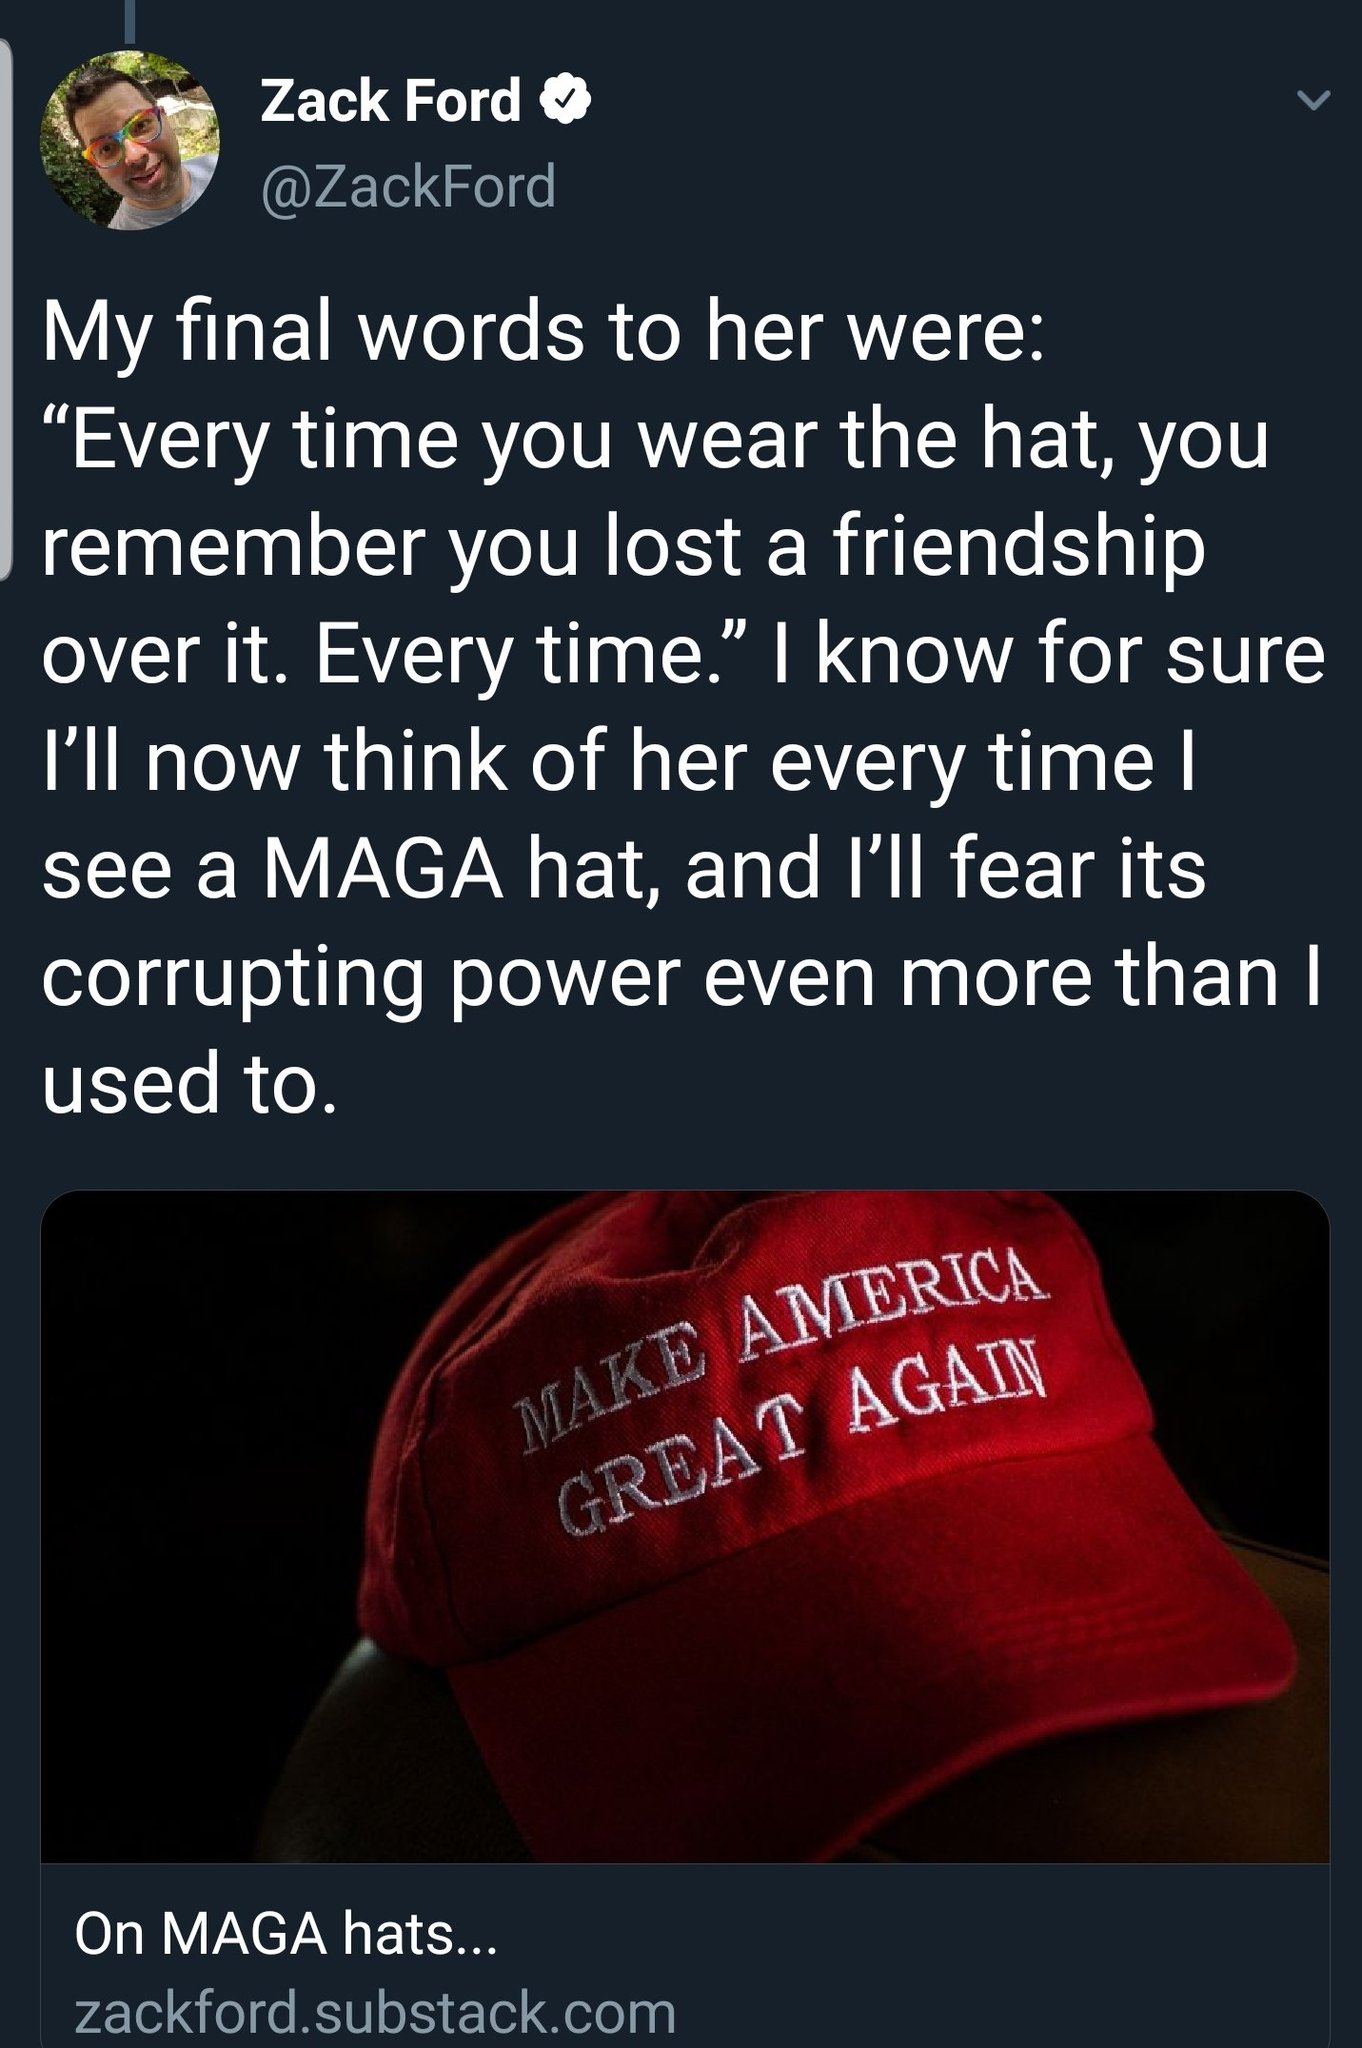 Ending a friendship over a fucking hat, what a Freaky Alien Genotype. Have fun memedroid